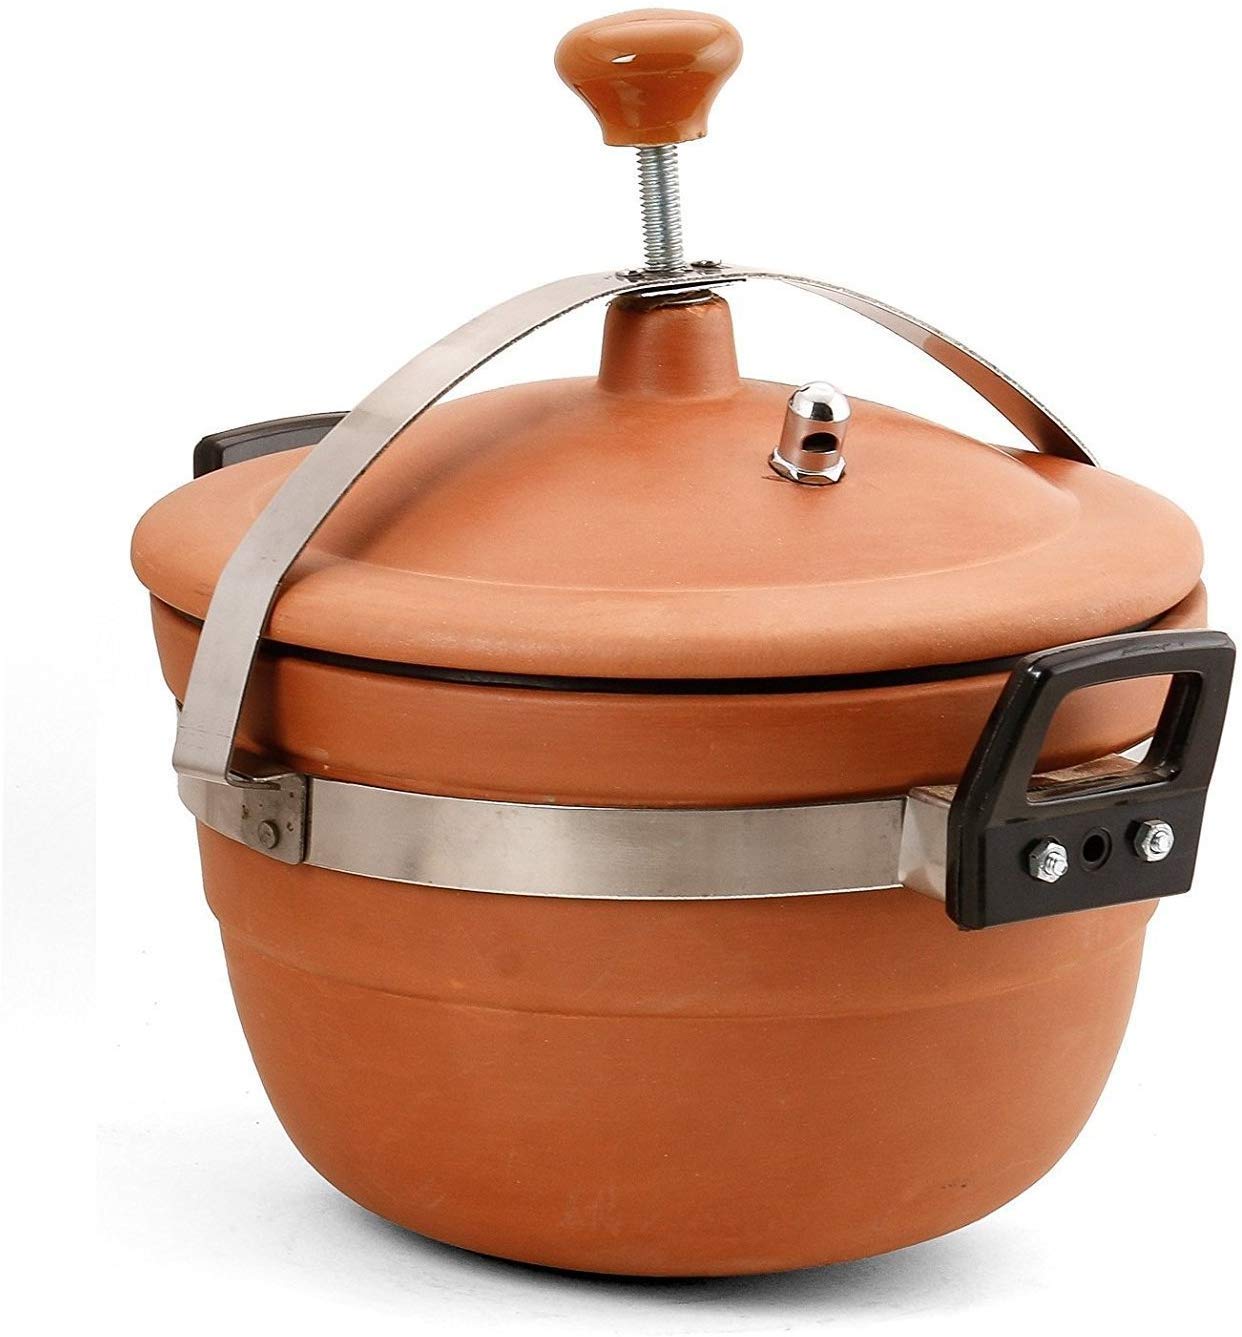 Clay Bottles to Pressure Cookers: 10 Terracotta Products For Your Home